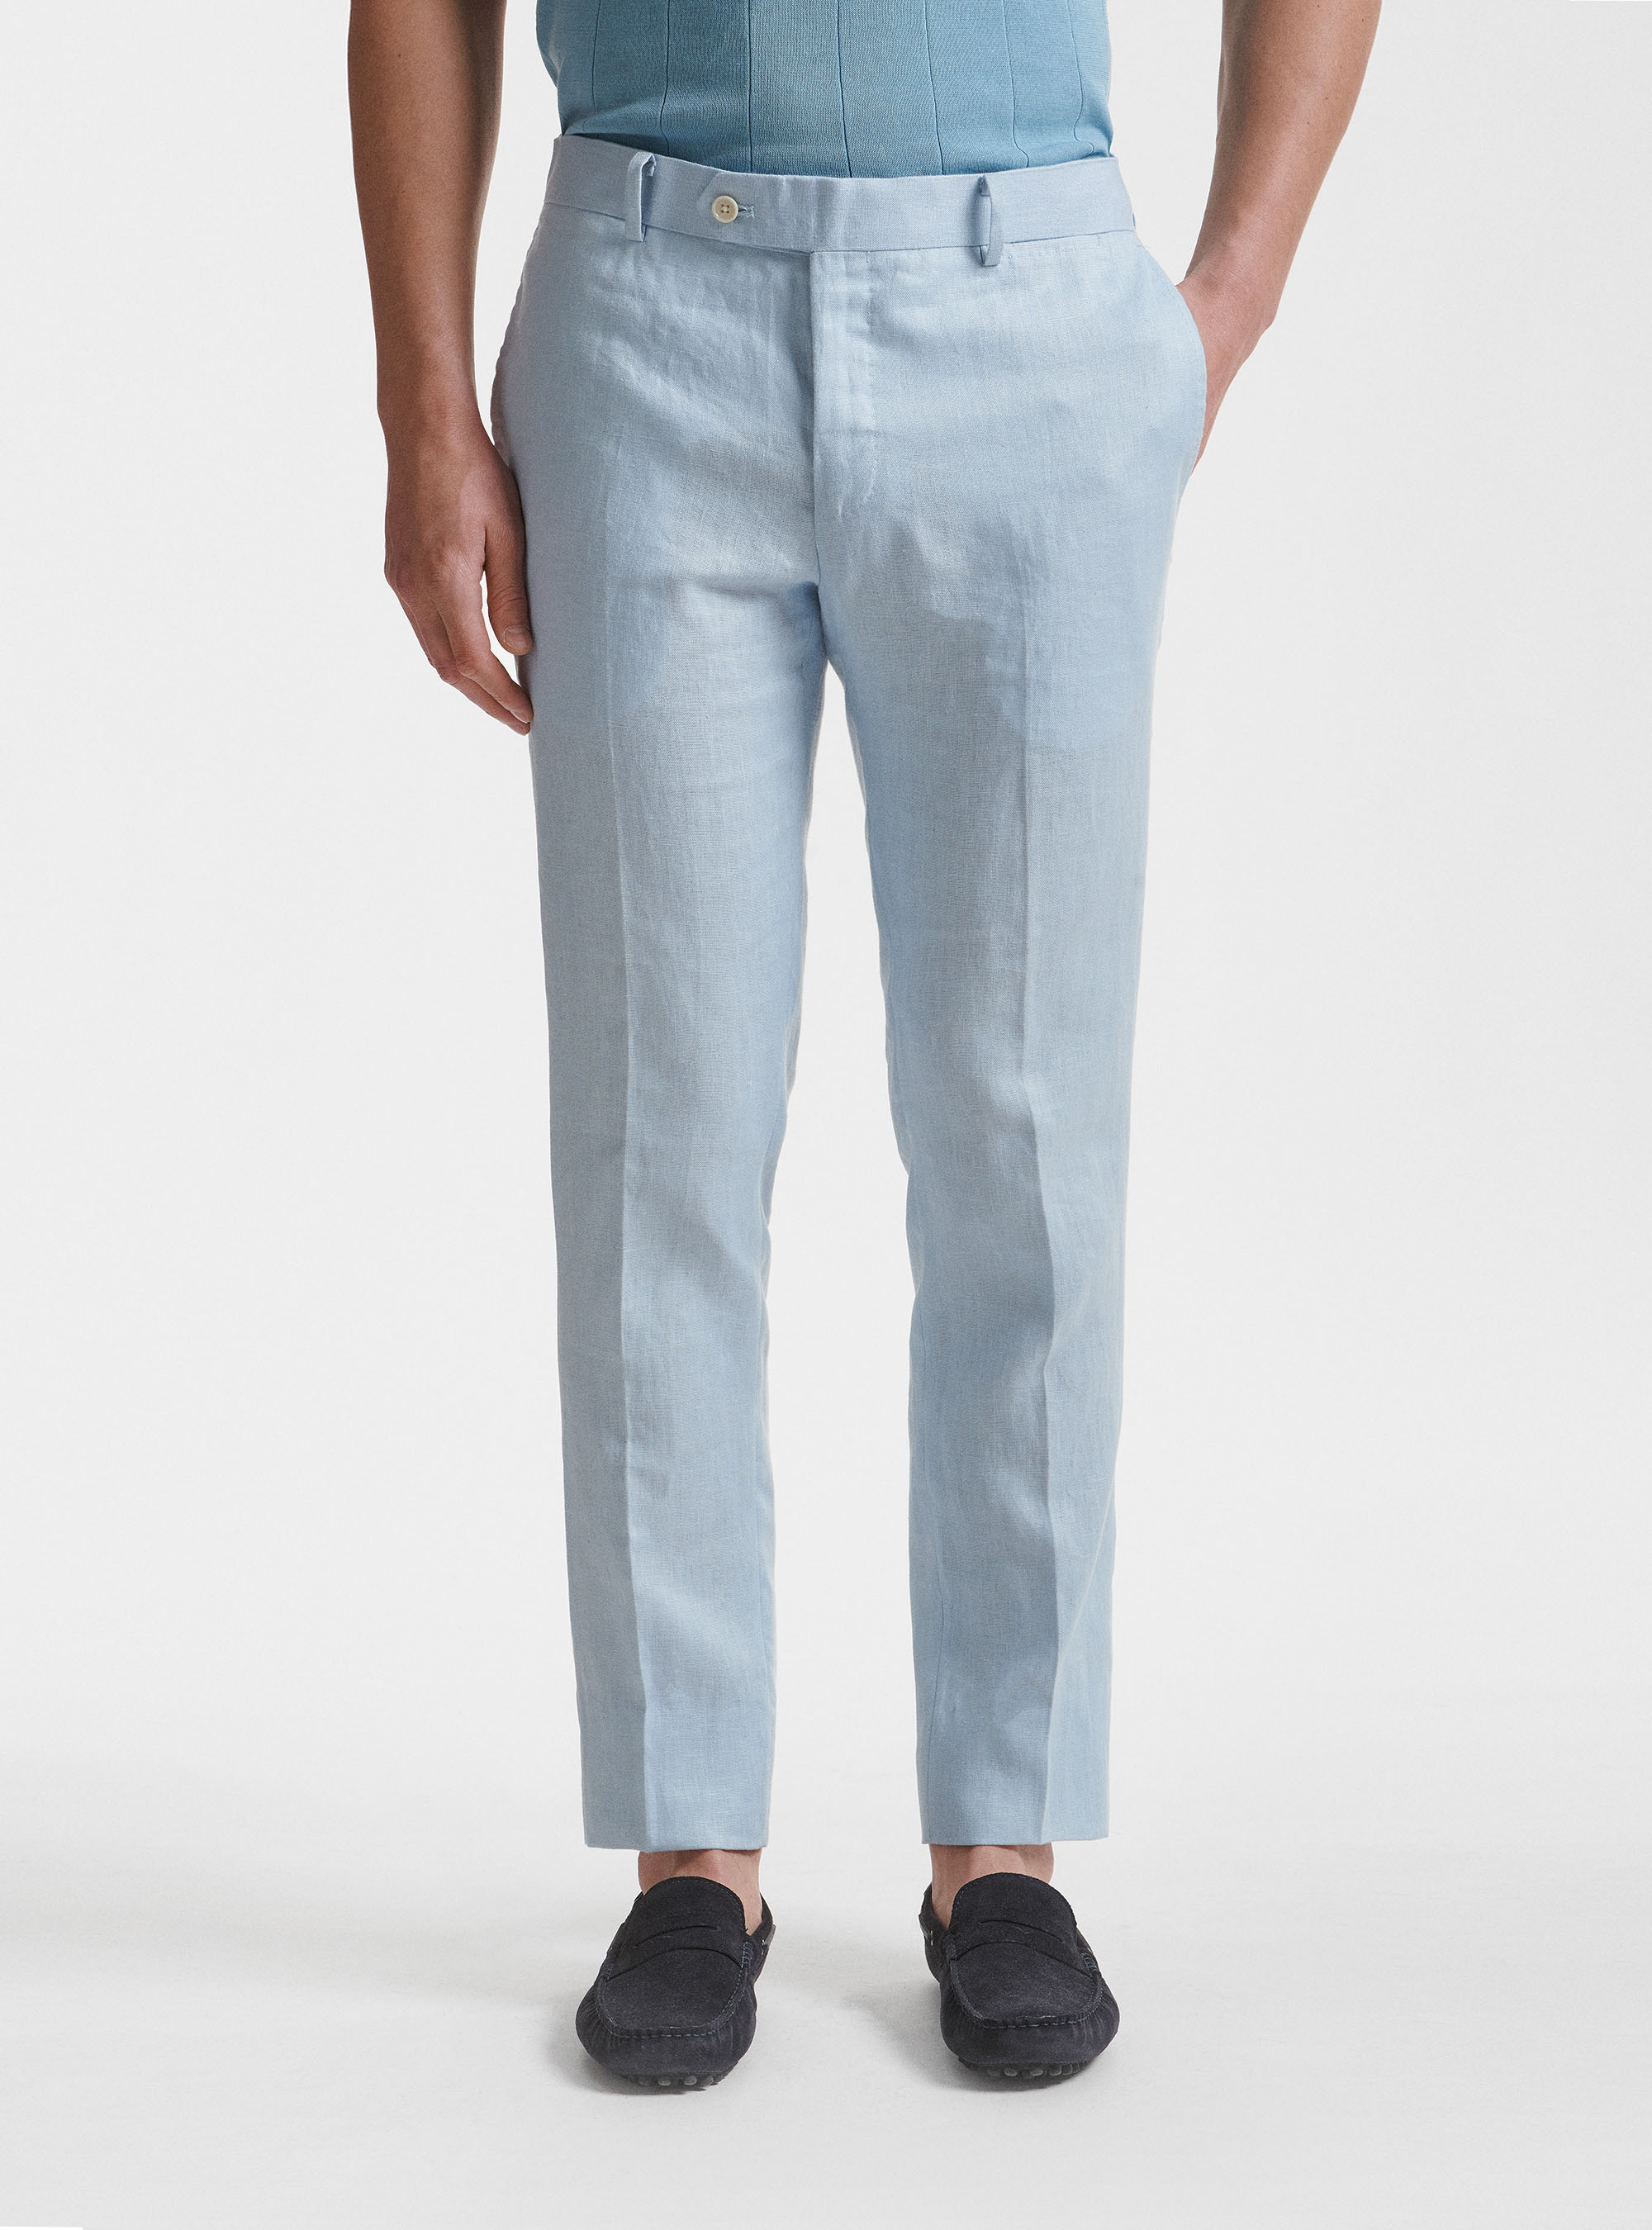 blue Linen trousers crystal blue  MADELEINE Fashion